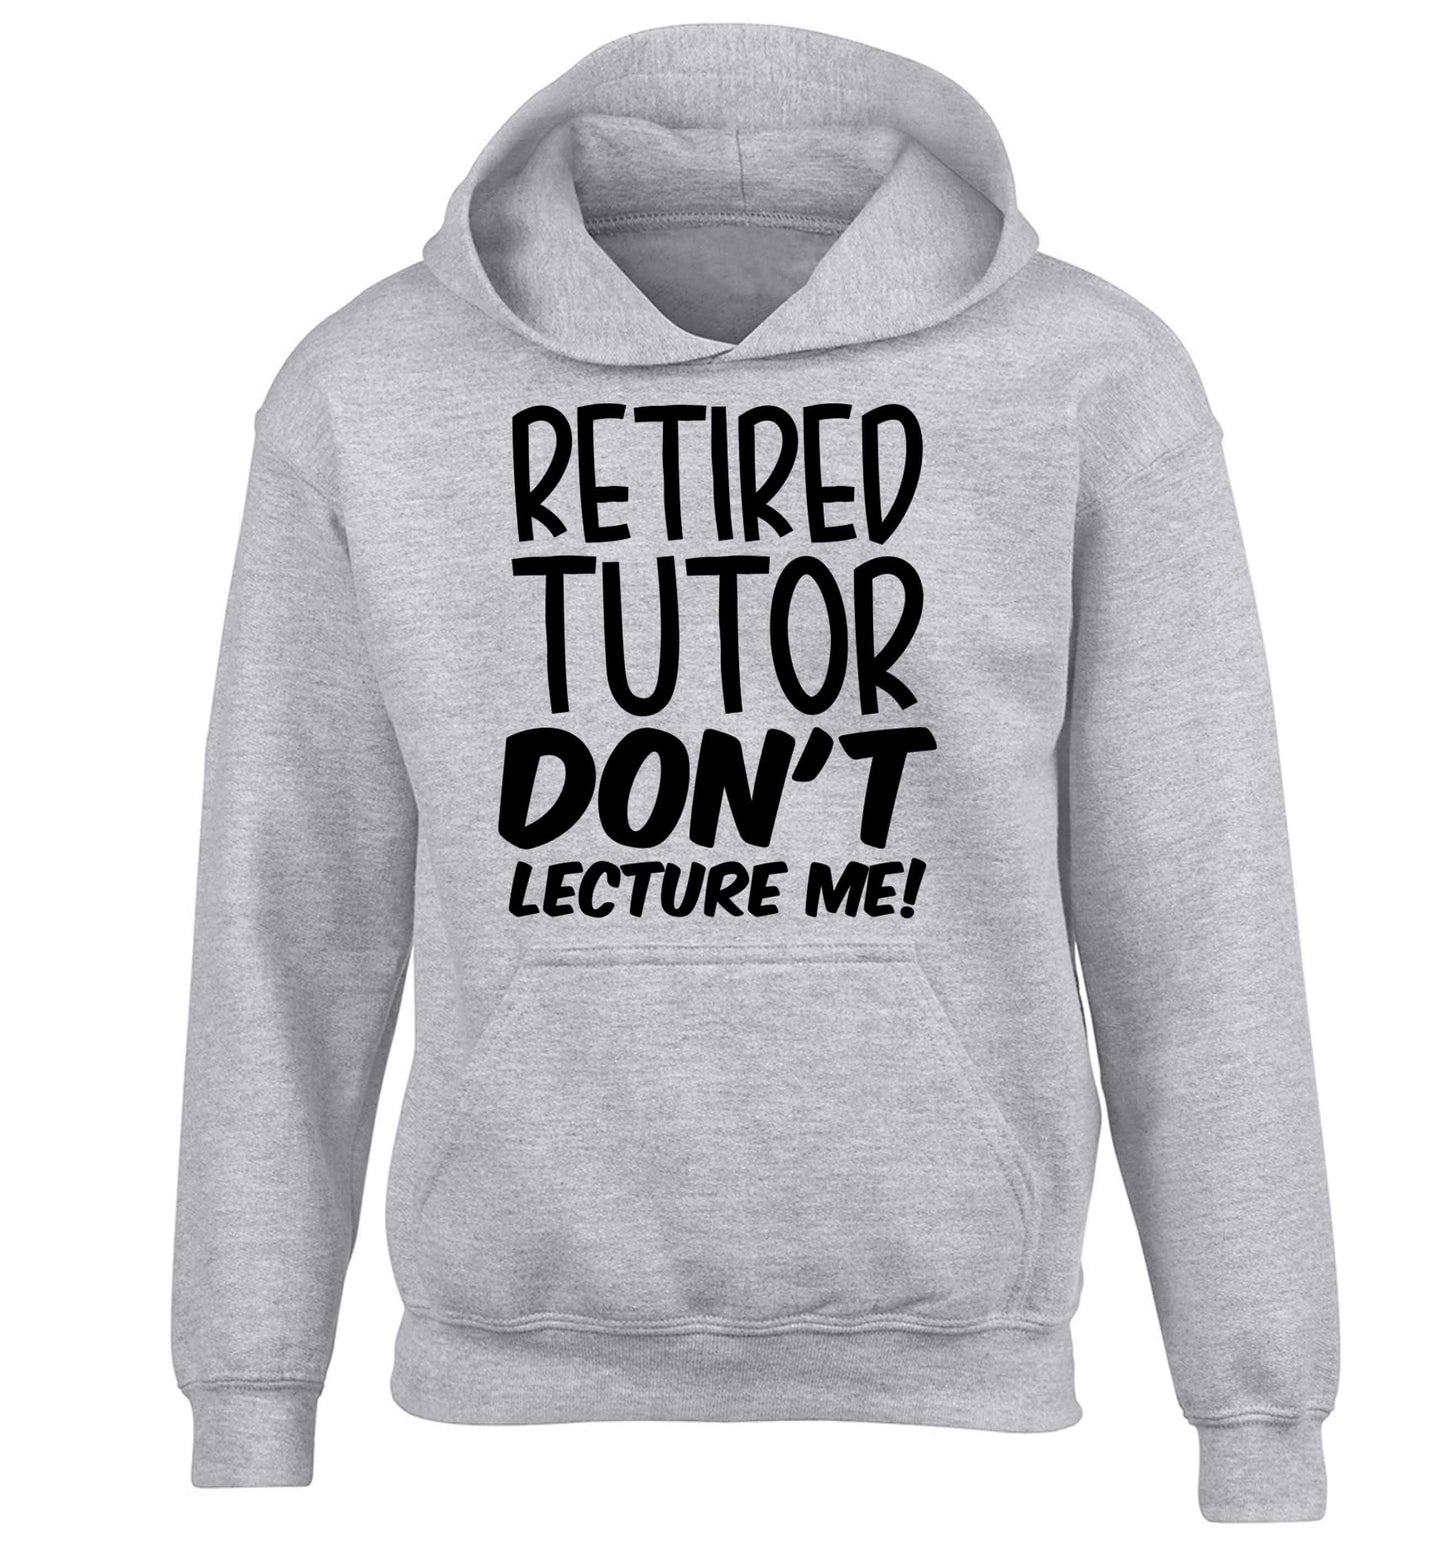 Retired tutor don't lecture me! children's grey hoodie 12-13 Years